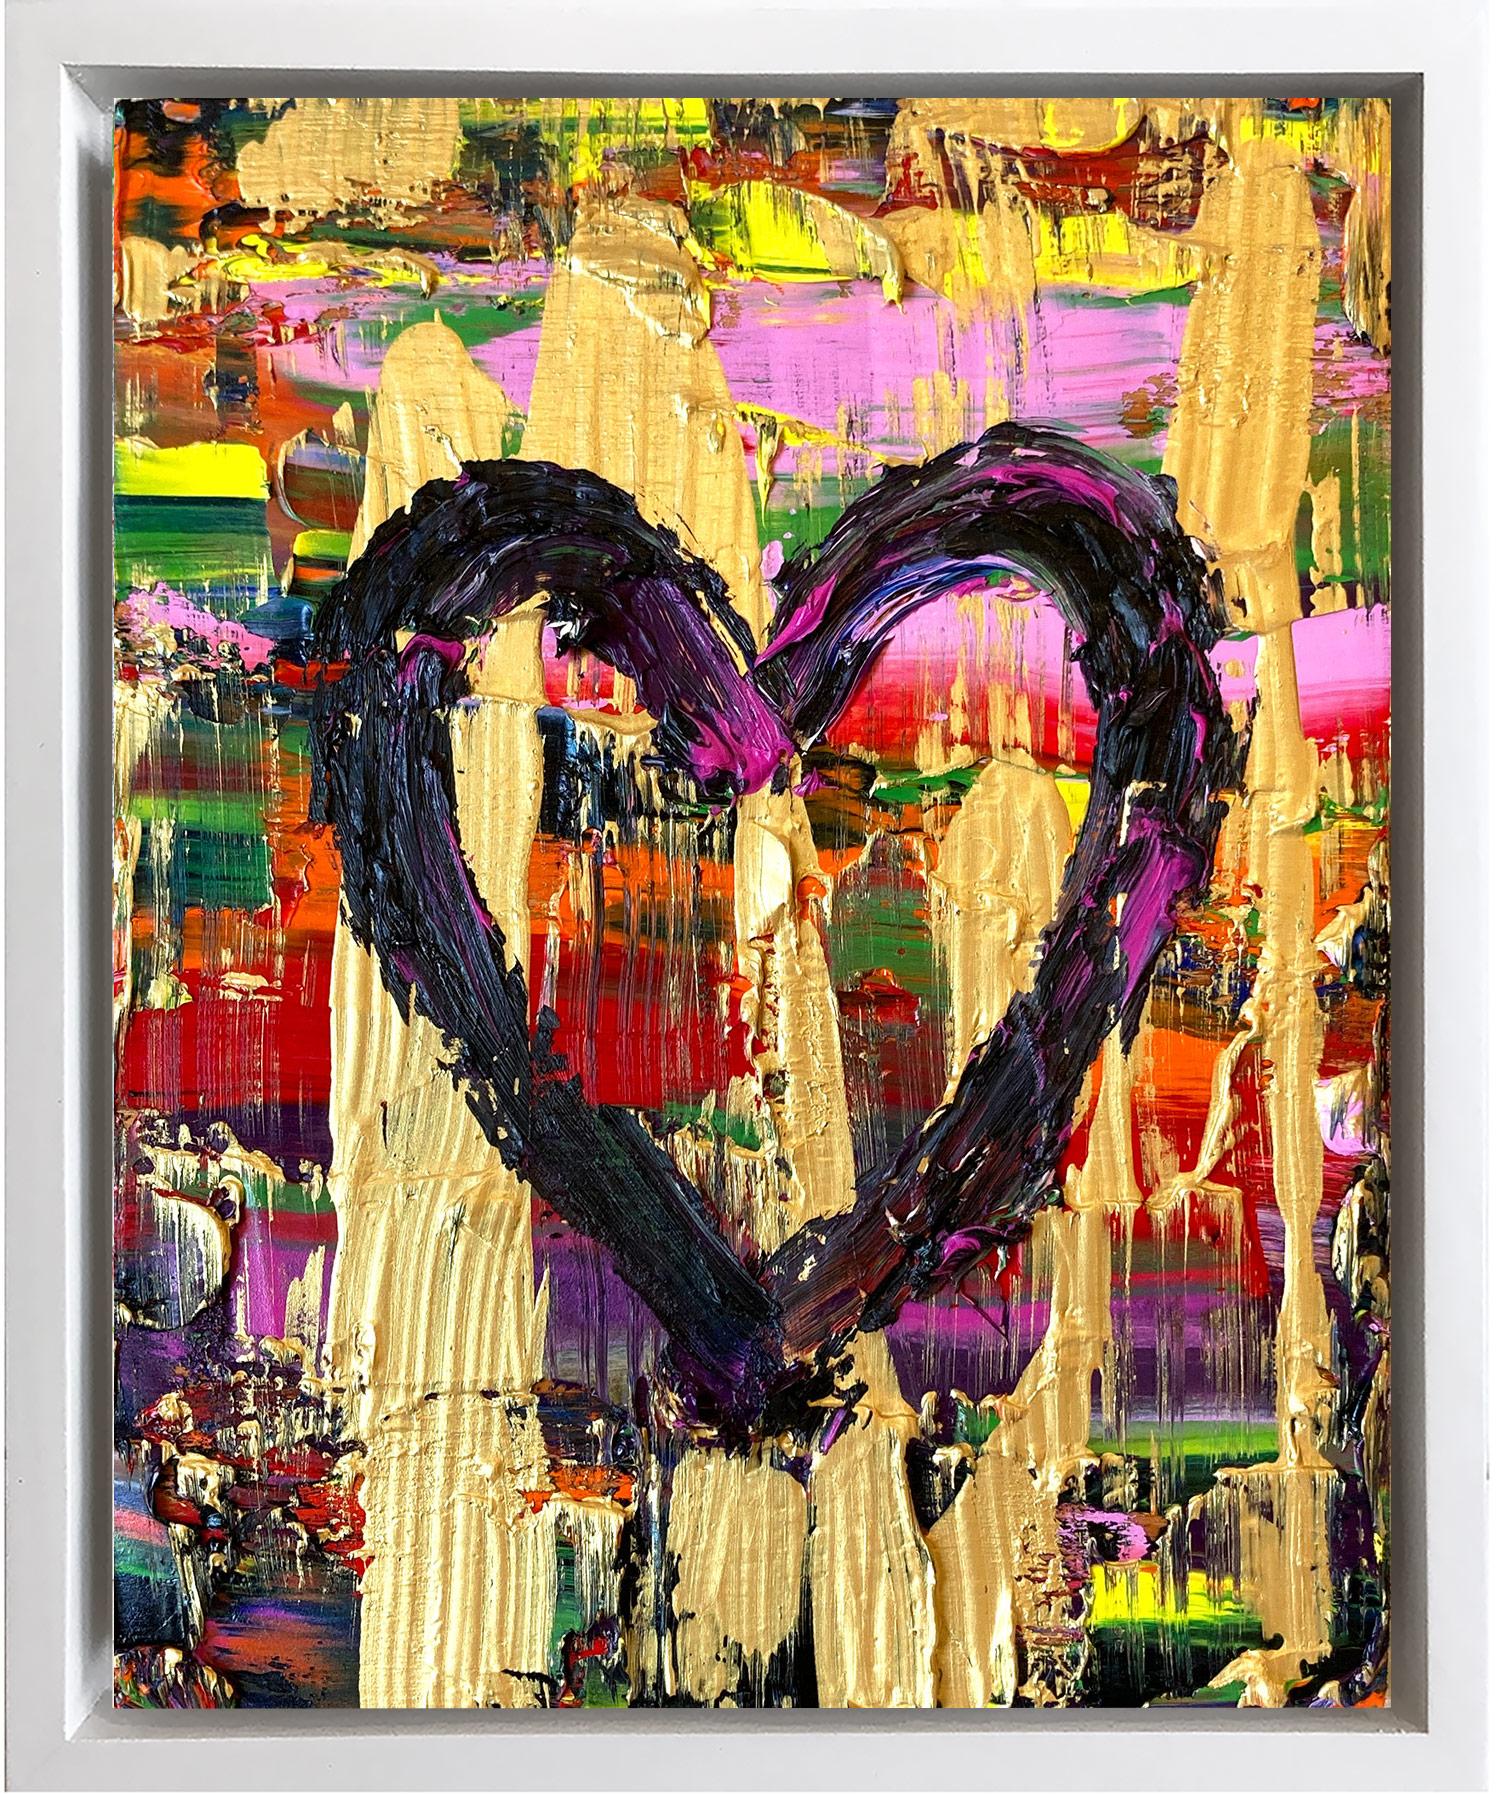 Cindy Shaoul Abstract Painting - "My Rock Candy Heart" Contemporary Pop Oil Painting with Floater Frame